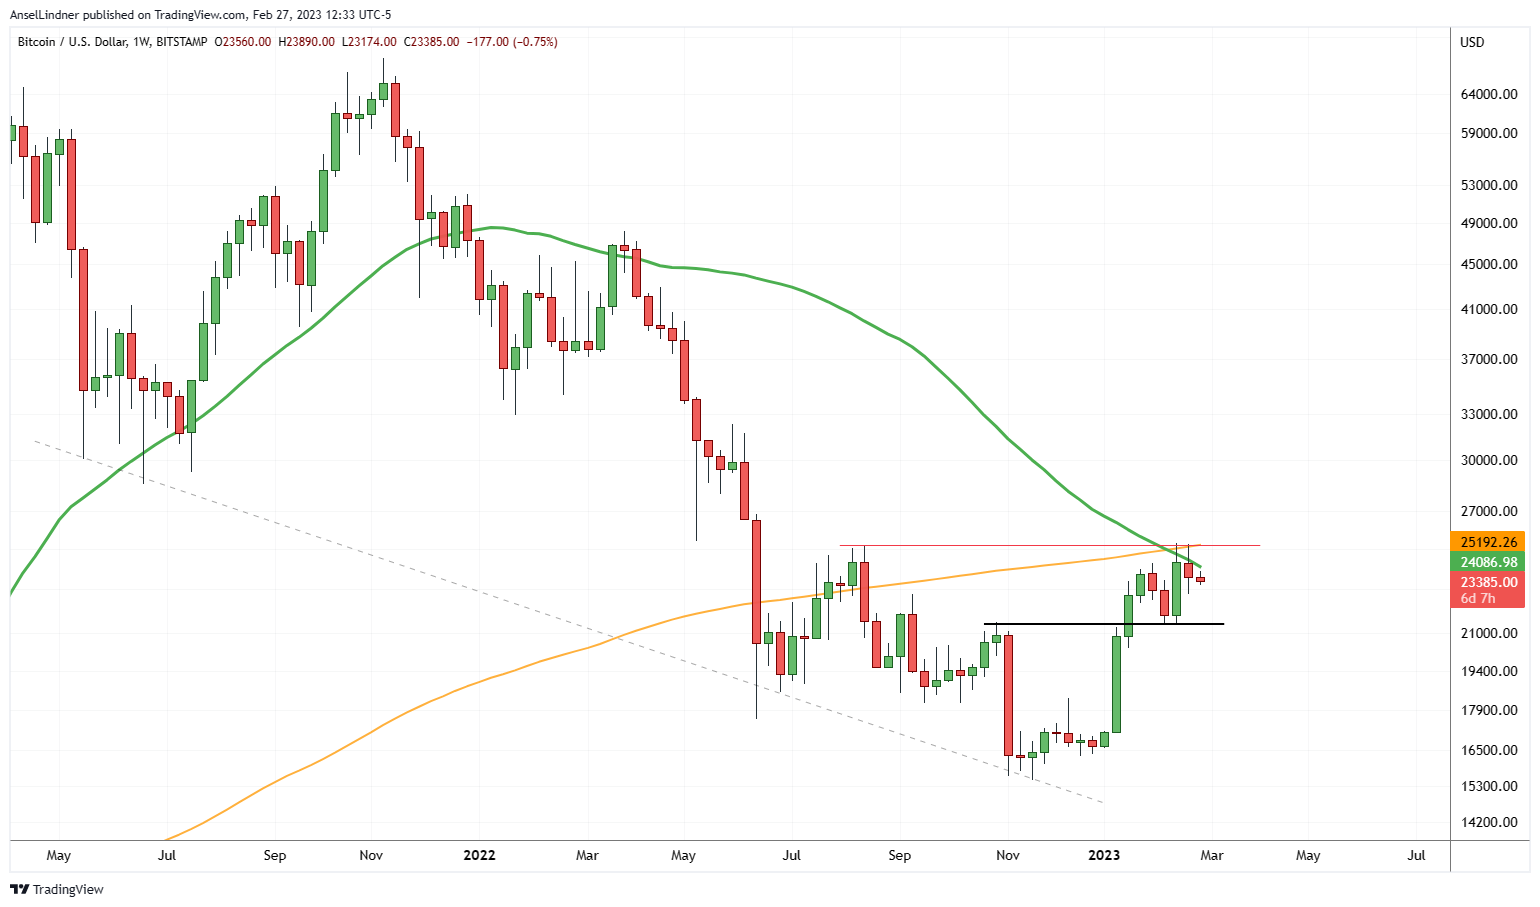 Bitcoin weekly chart with 50 and 200-period moving averages